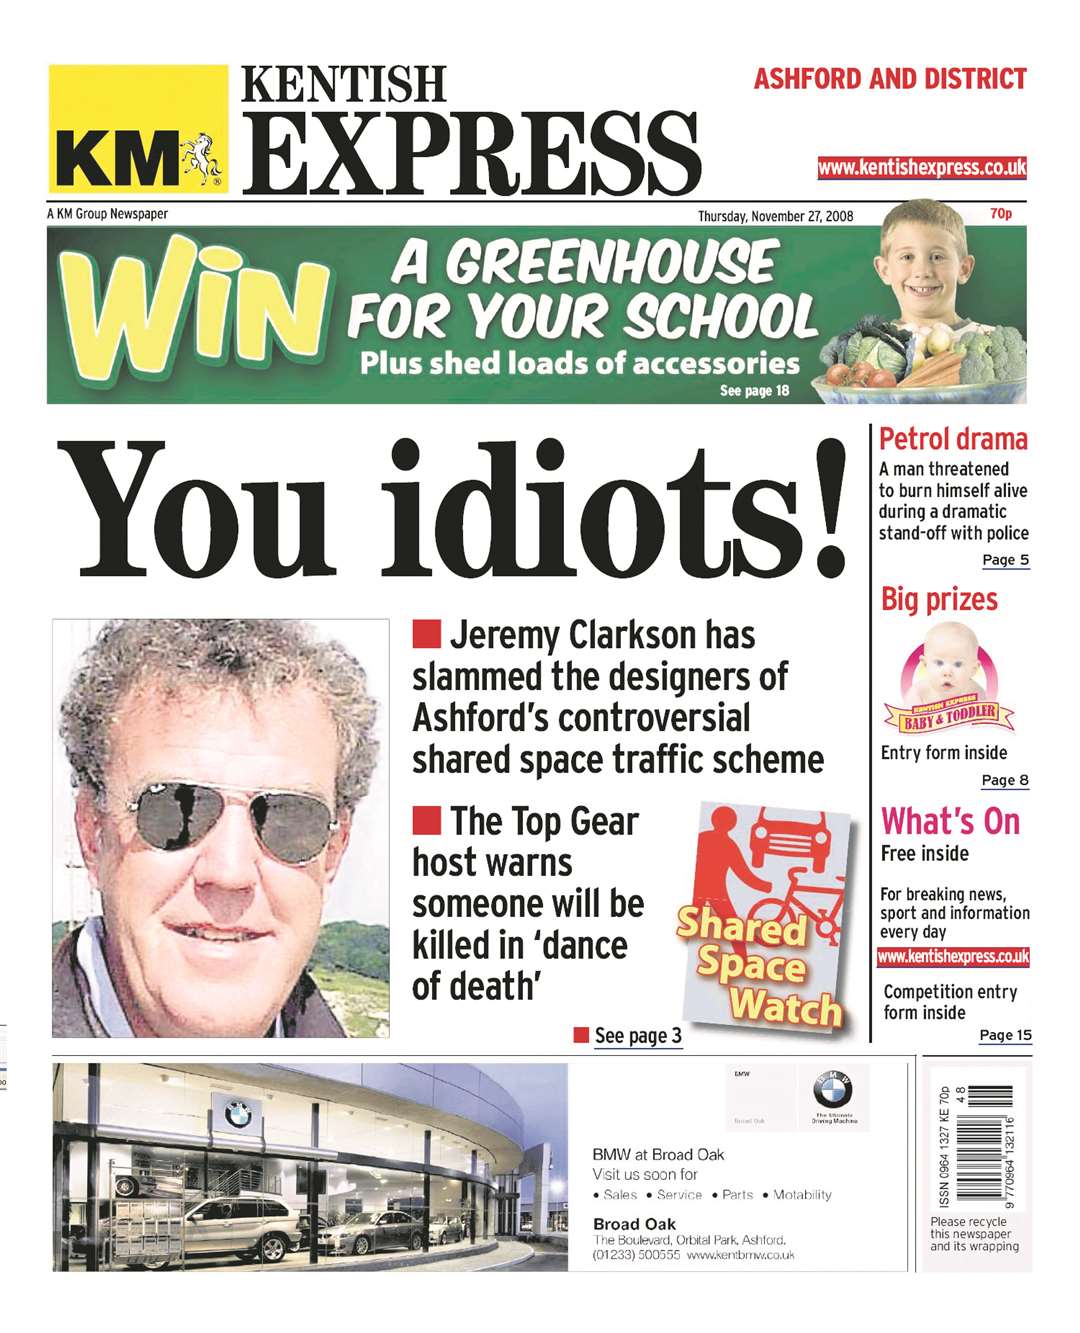 How Clarkson's original comments were reported in 2008.